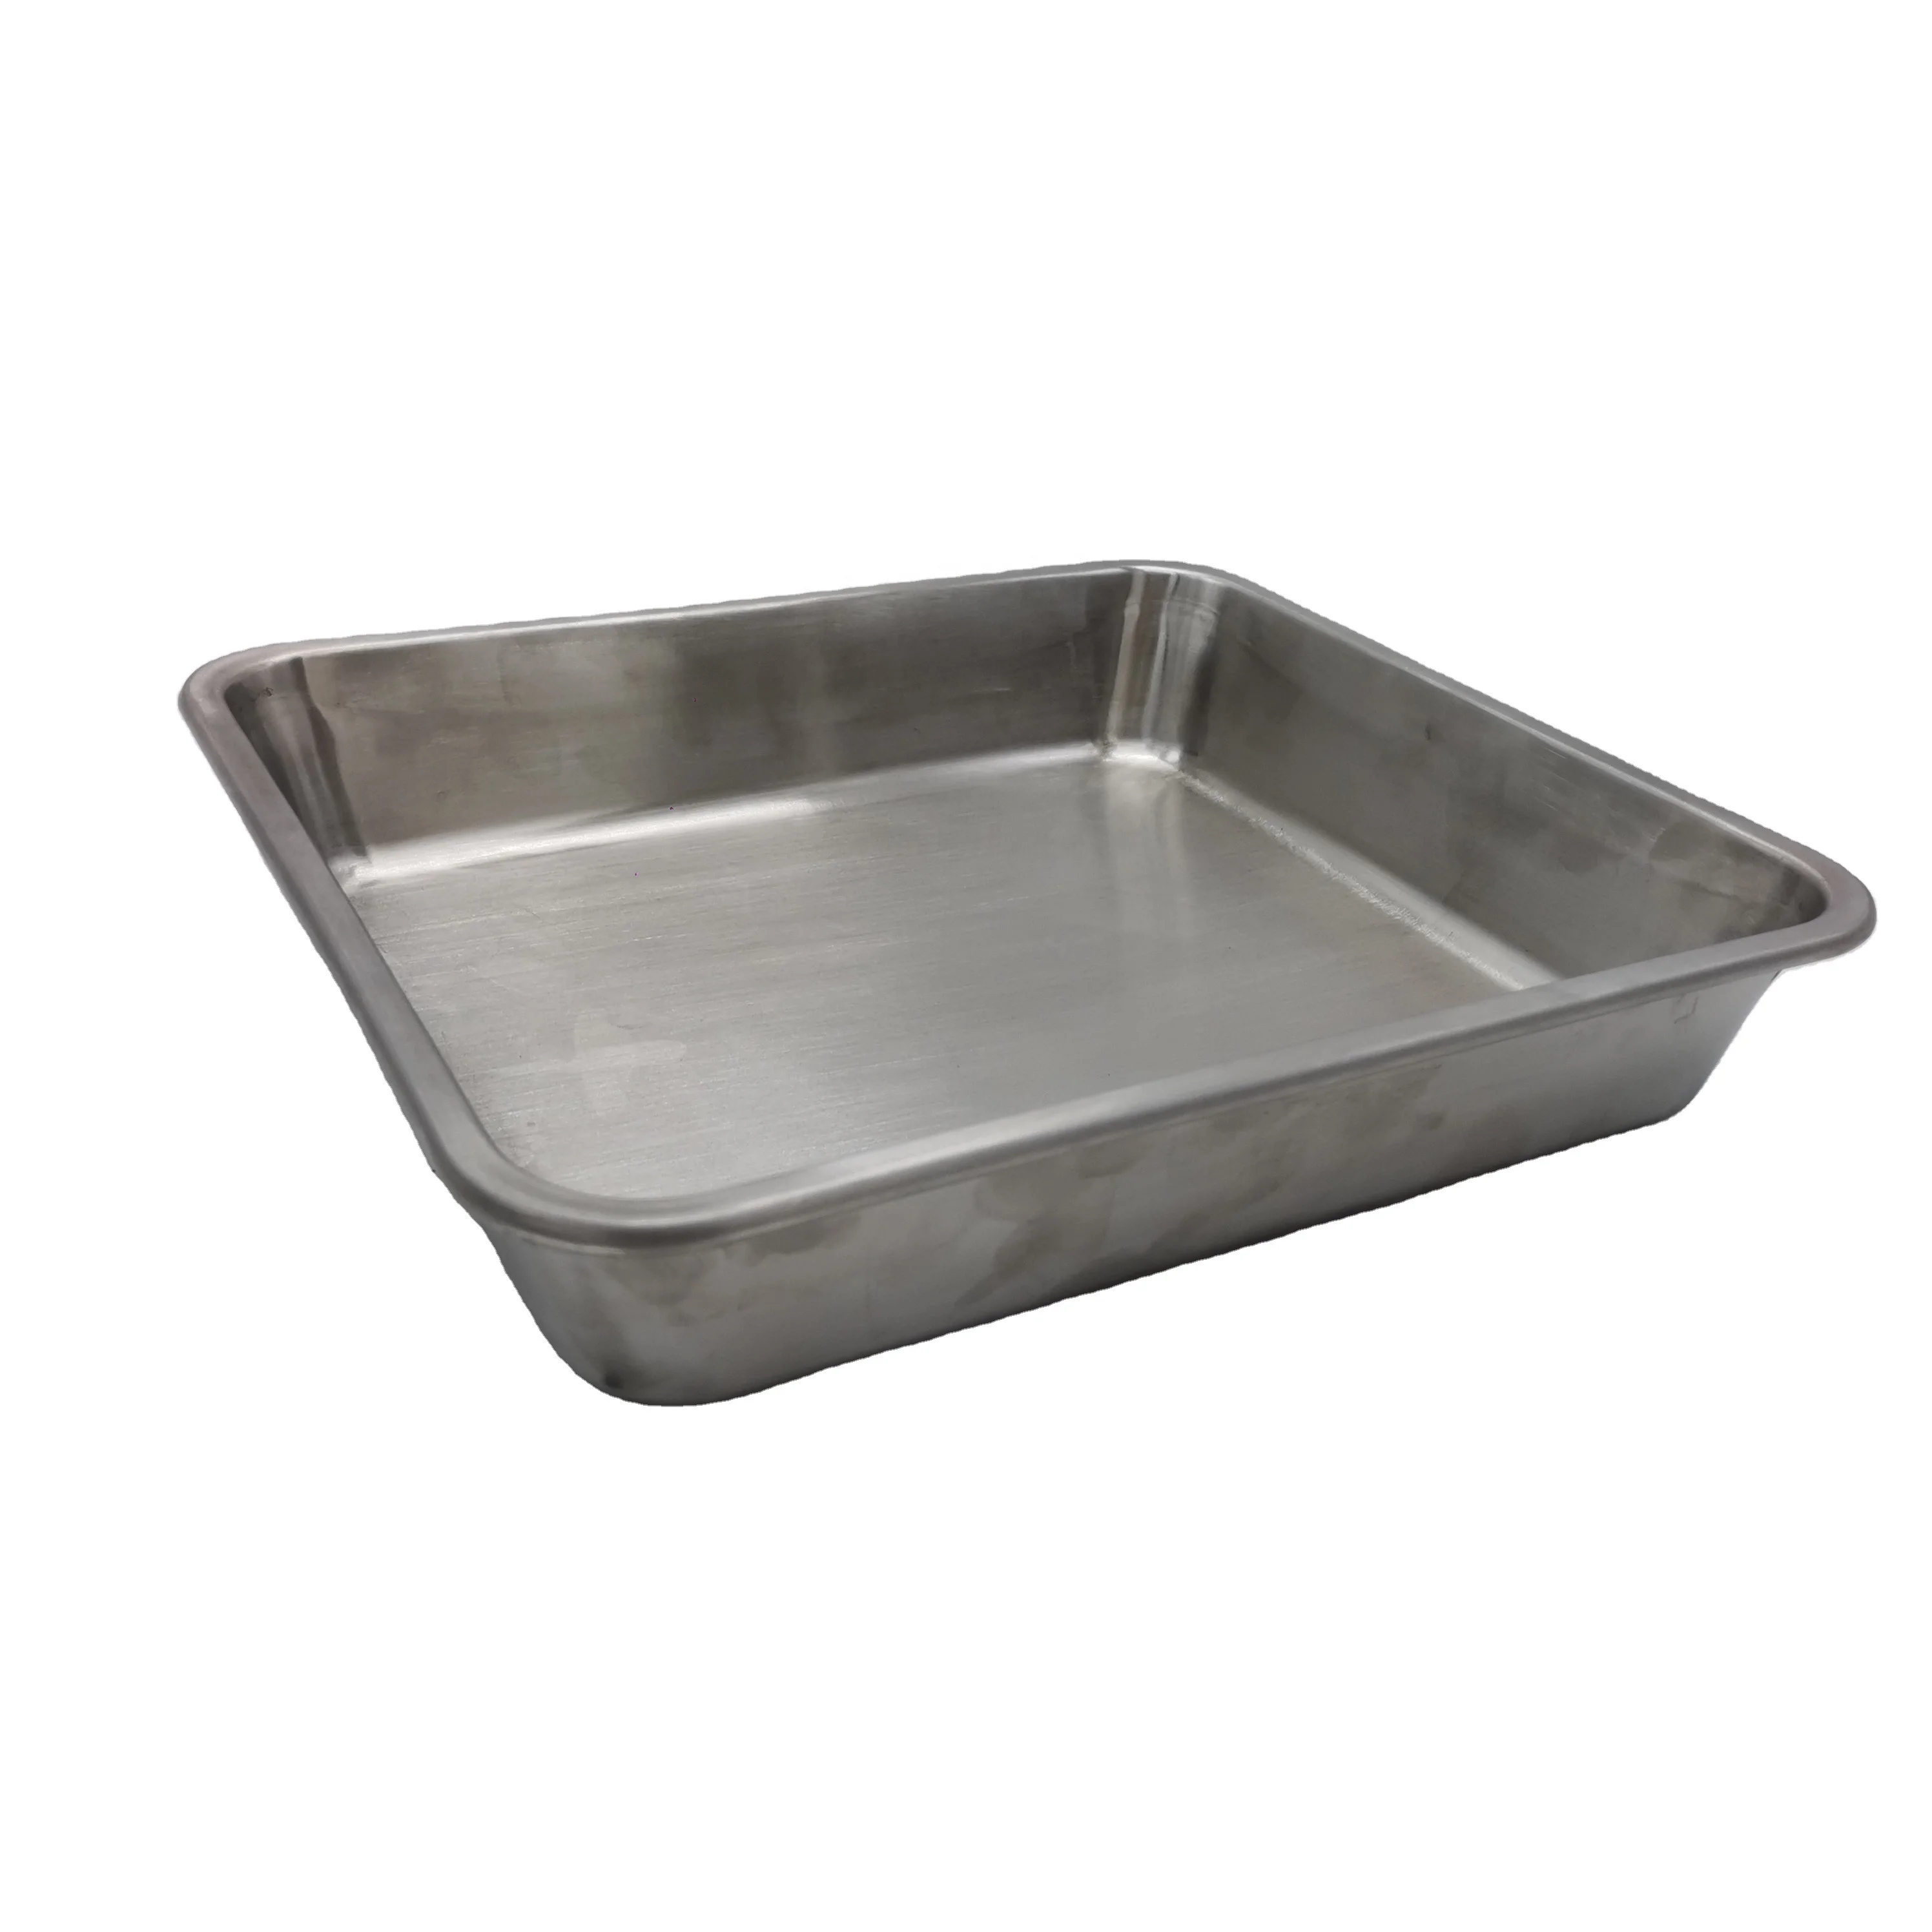 High Quality Stainless Steel Roasting Deep Oven Tray Baking Tin Tray